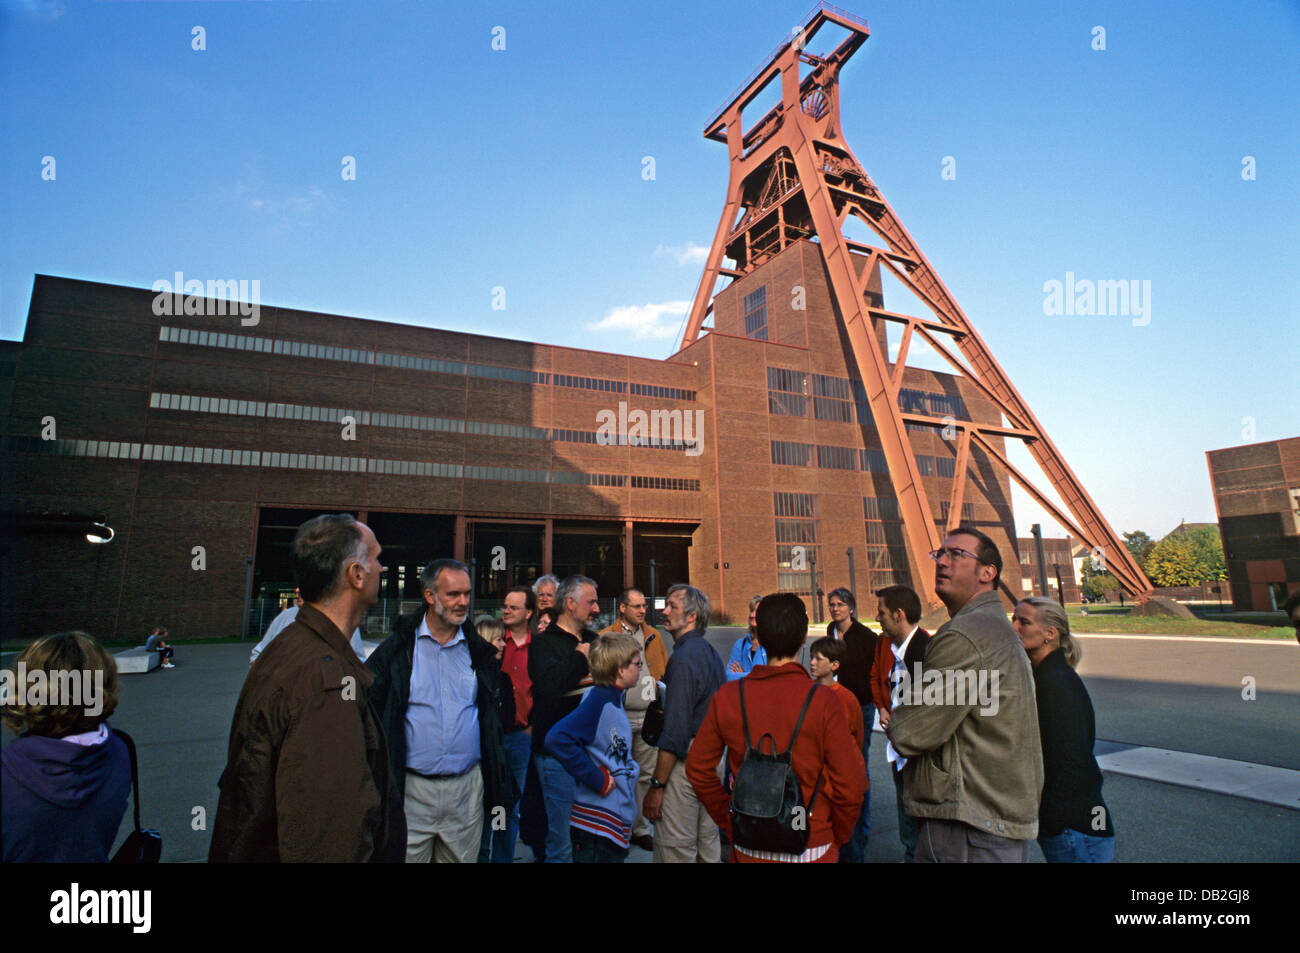 A group of tourists stands next to the hoist construction of shaft XII on the premises of 'Zollverein' Coal Mine Industrial Complex in Essen, Germany, 08 October 2007. The landmark structure and its surrounding buildings were designed by architects Fritz Schupp and Martin Kremmer in the 1920s and built within four years as of 1928. The historical coal-mining site was inscribed as U Stock Photo